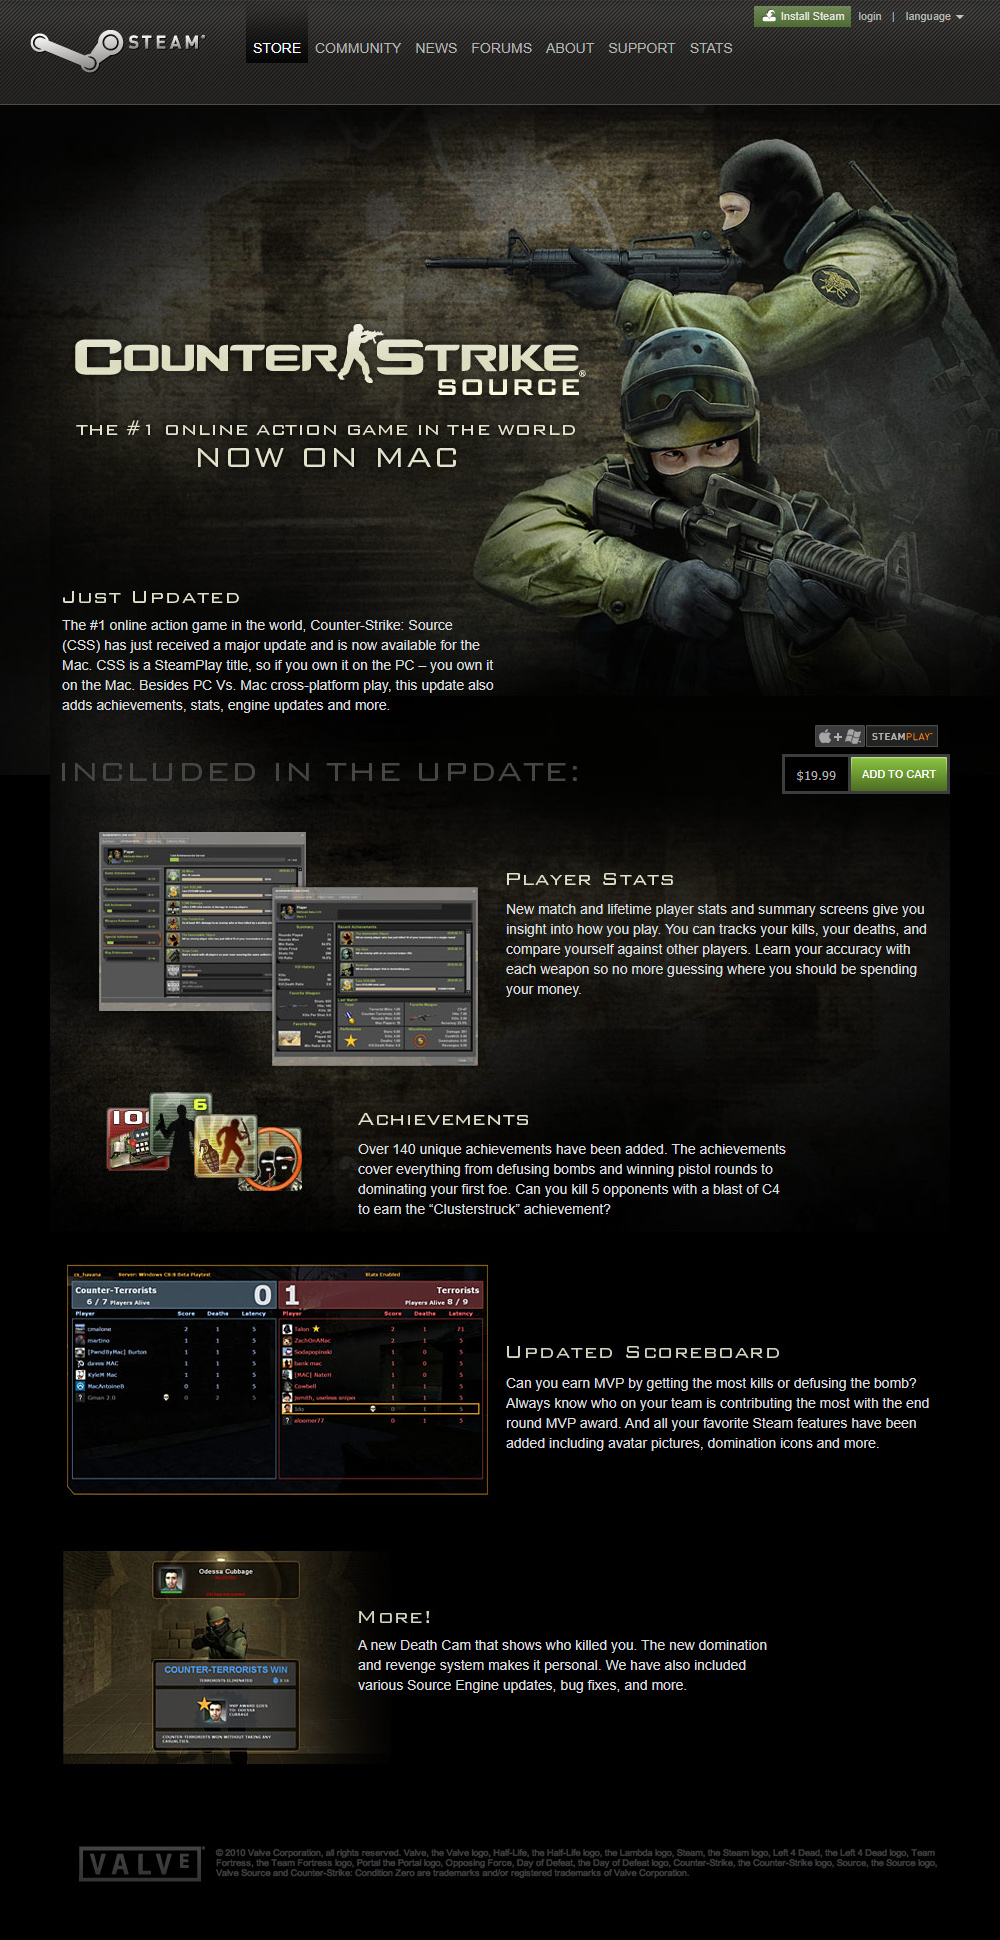 Counter-Strike in 2010